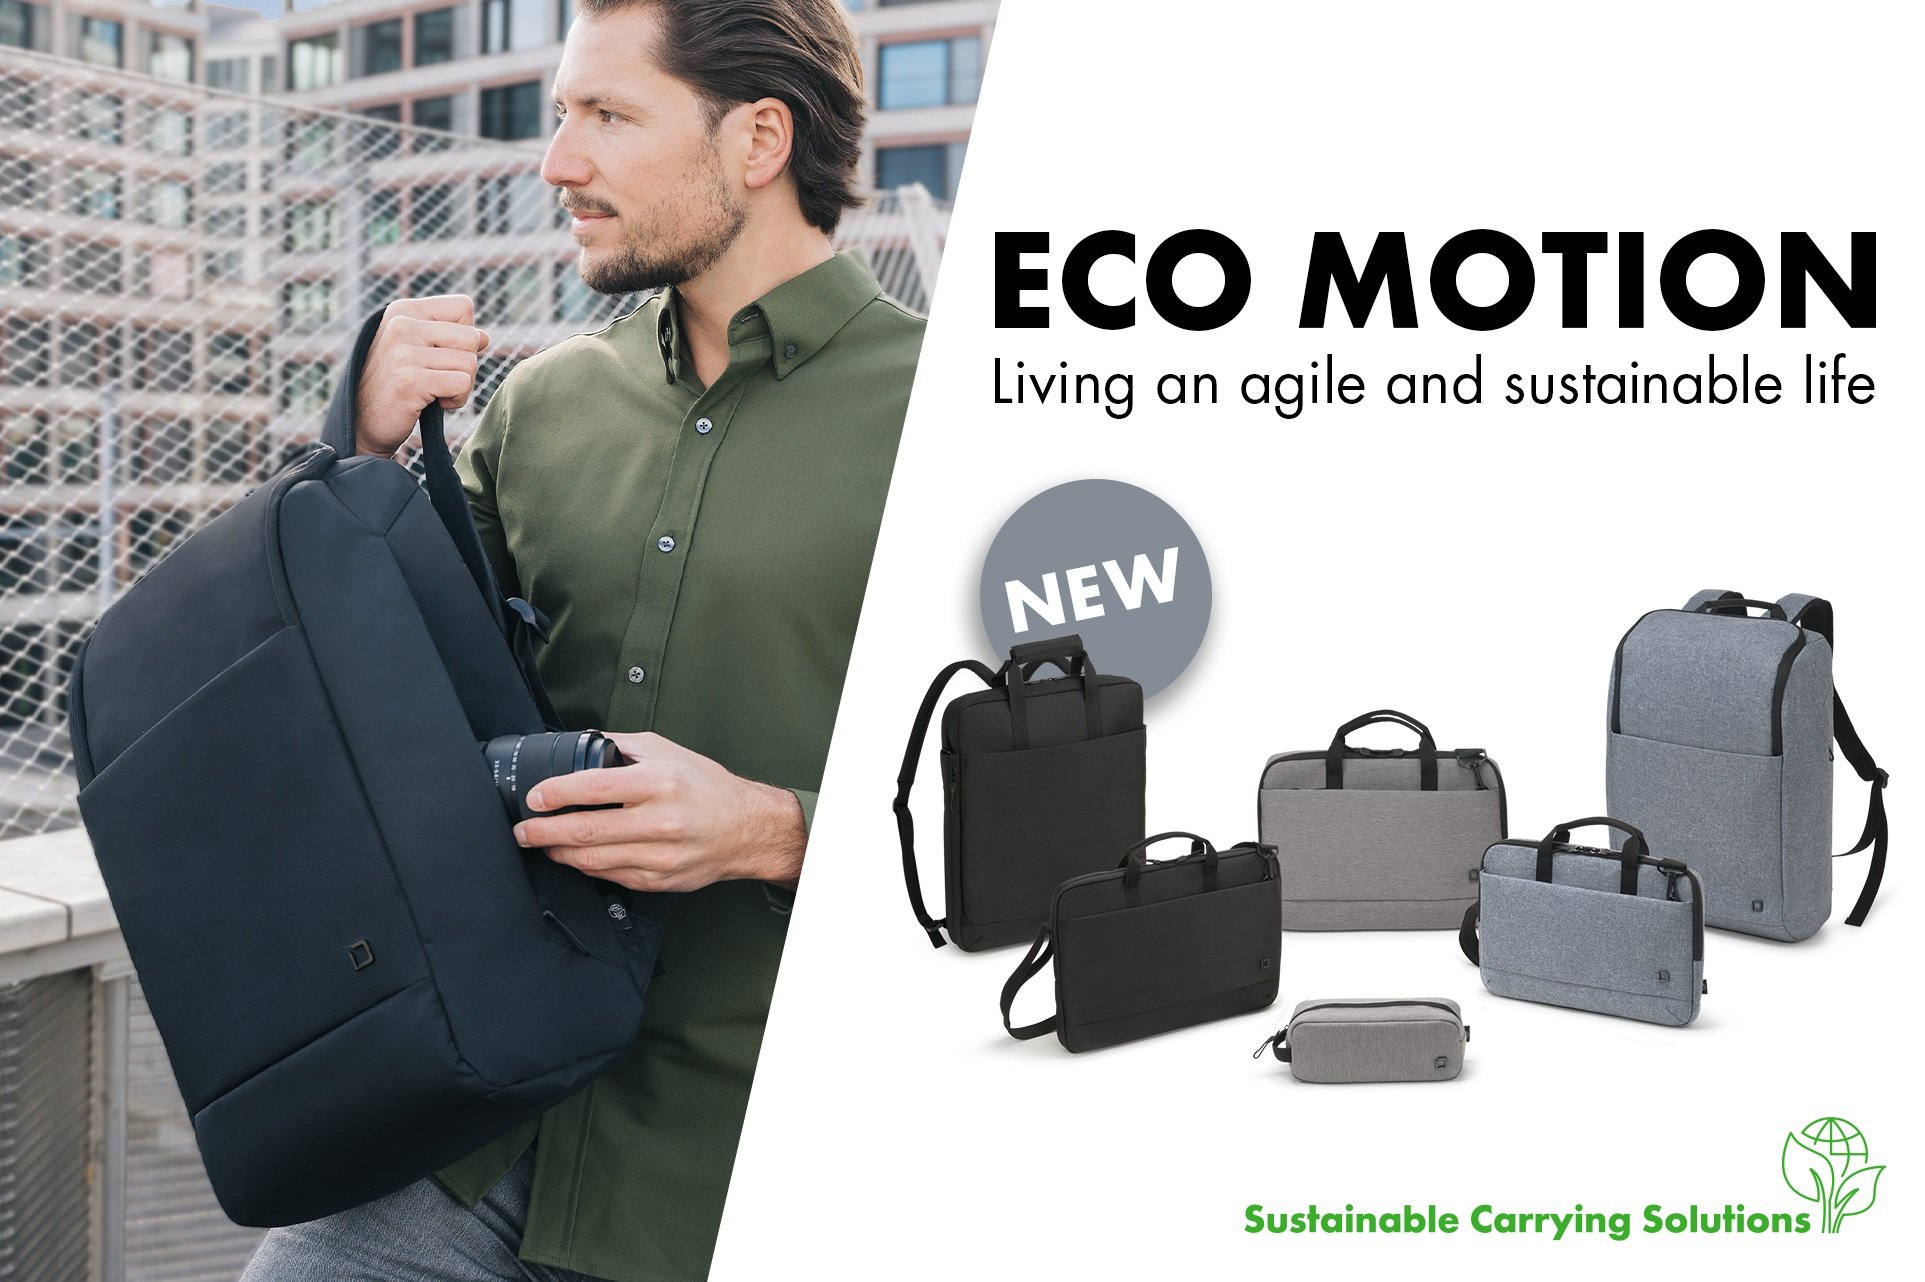 Eco MOTION - Living an agile and sustainable life